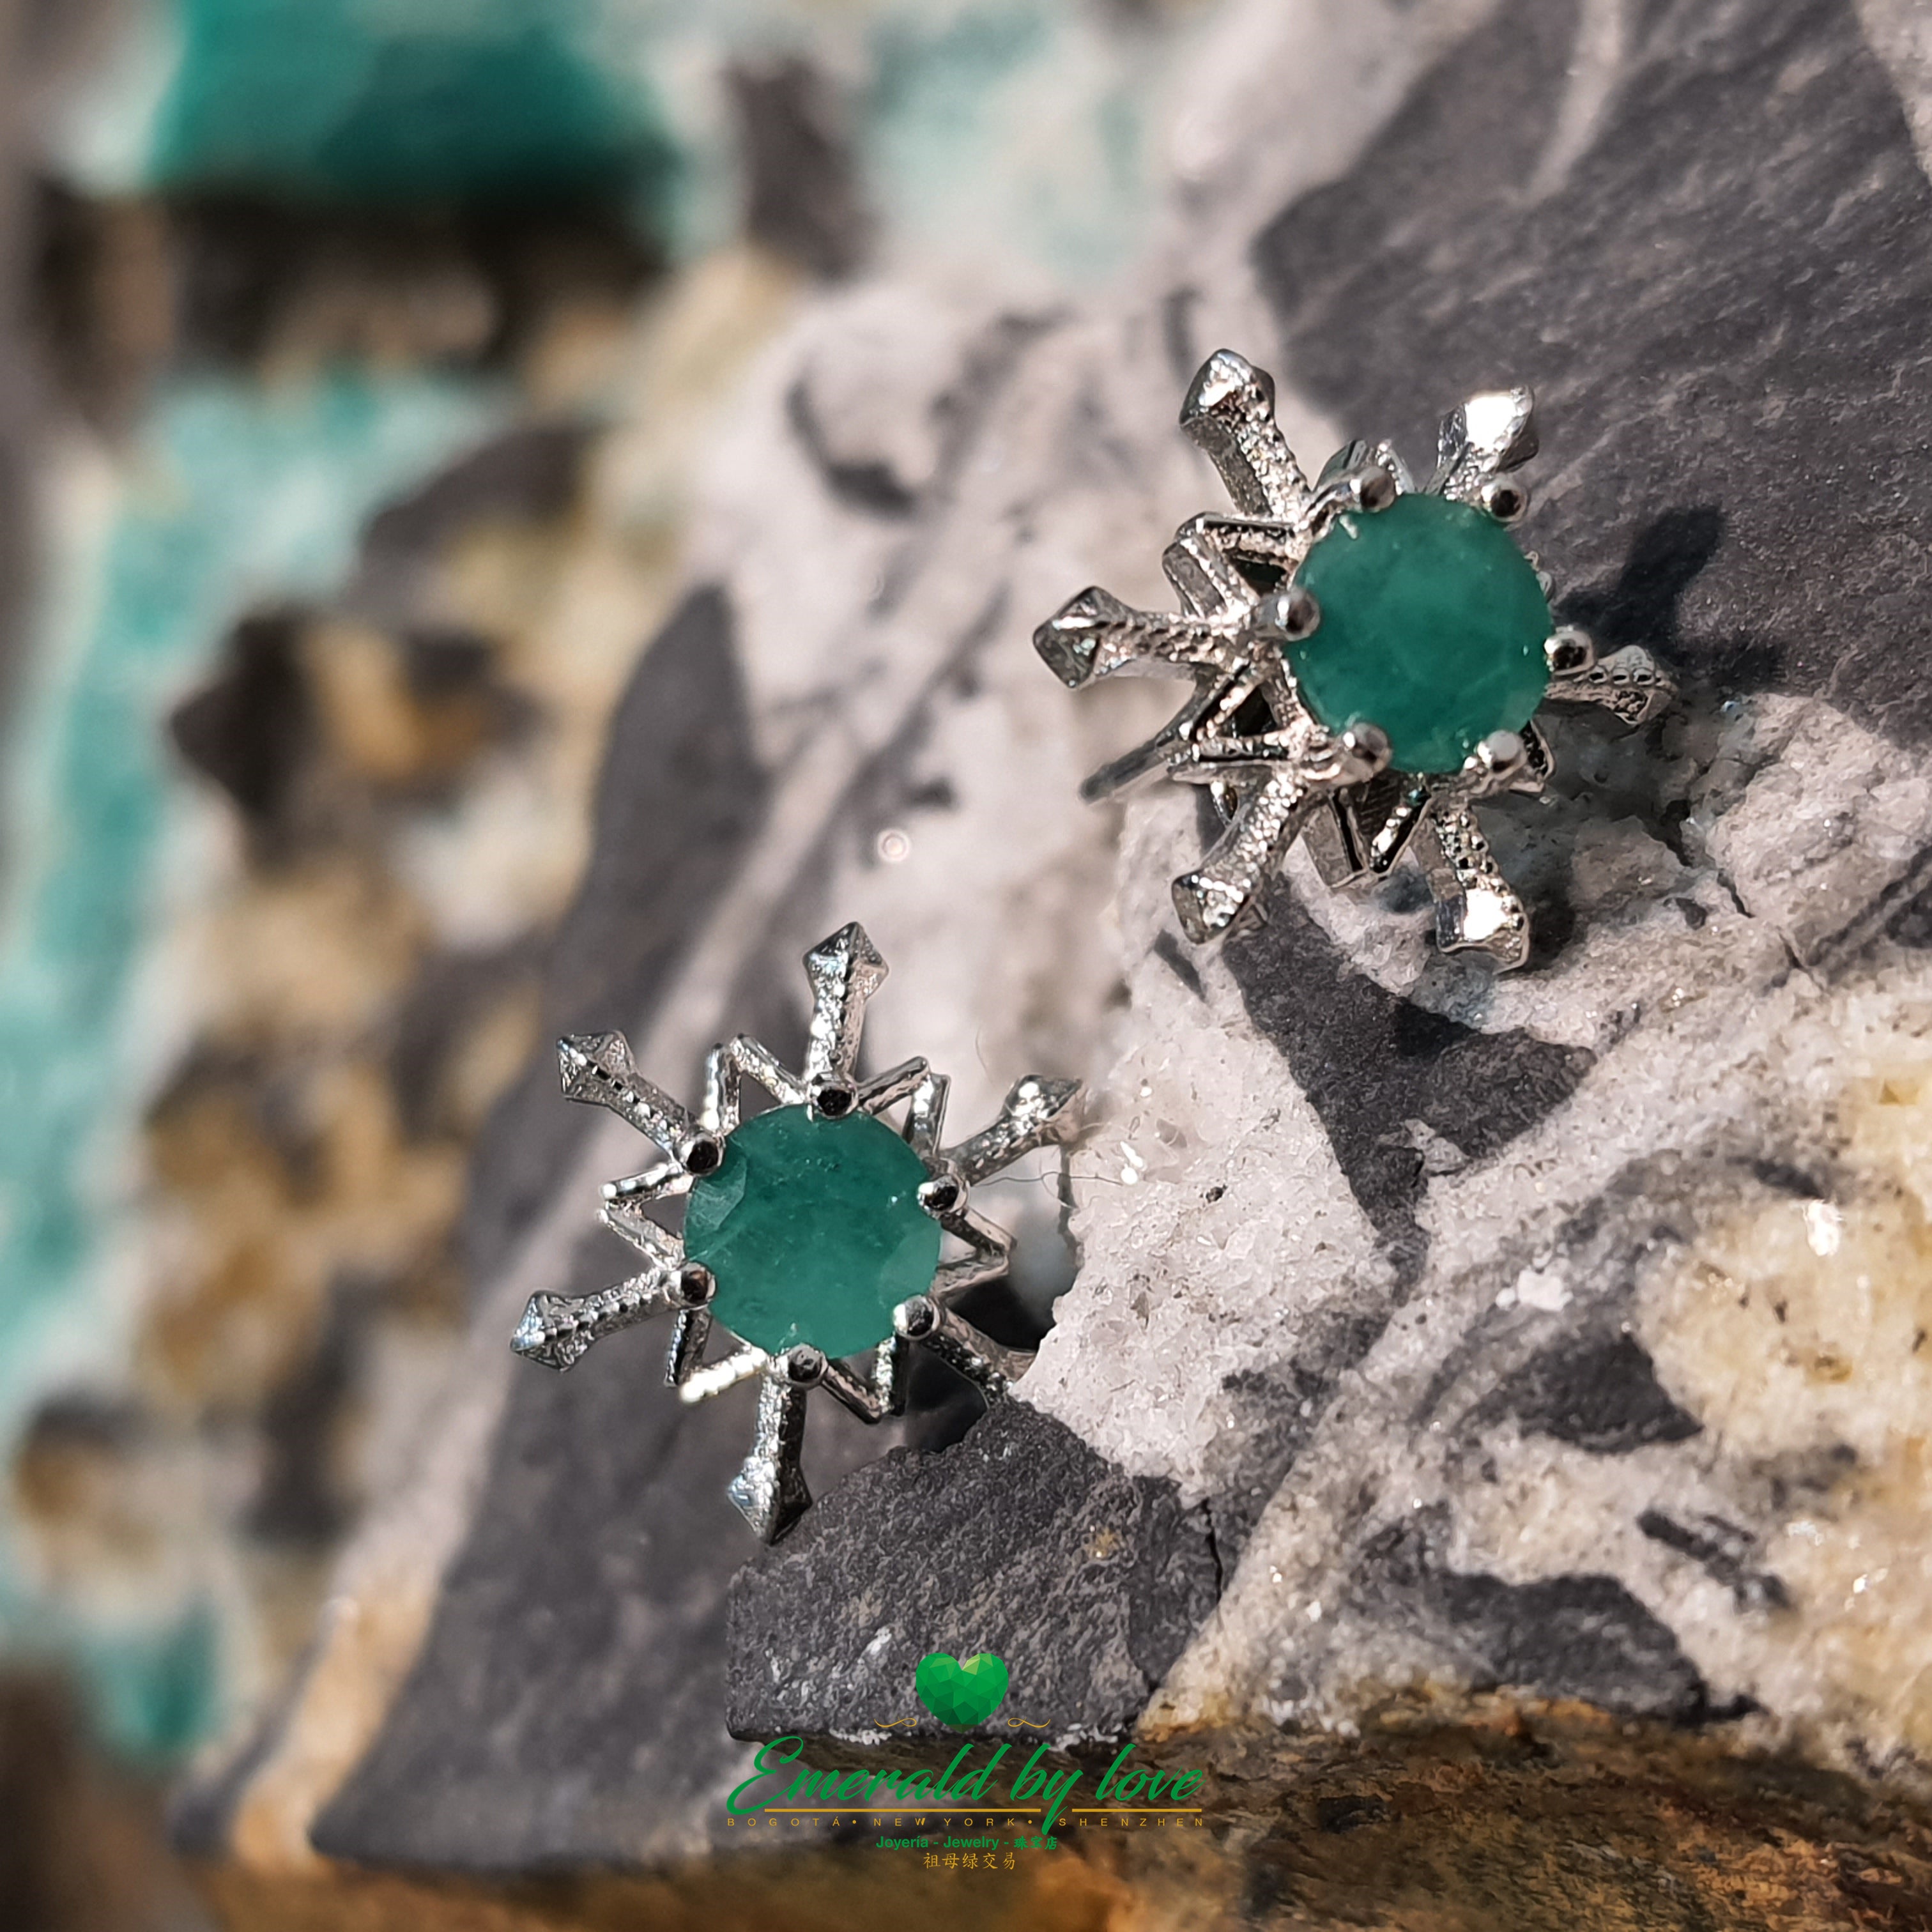 Sterling Silver Snowflake Earrings with Colombian Emerald